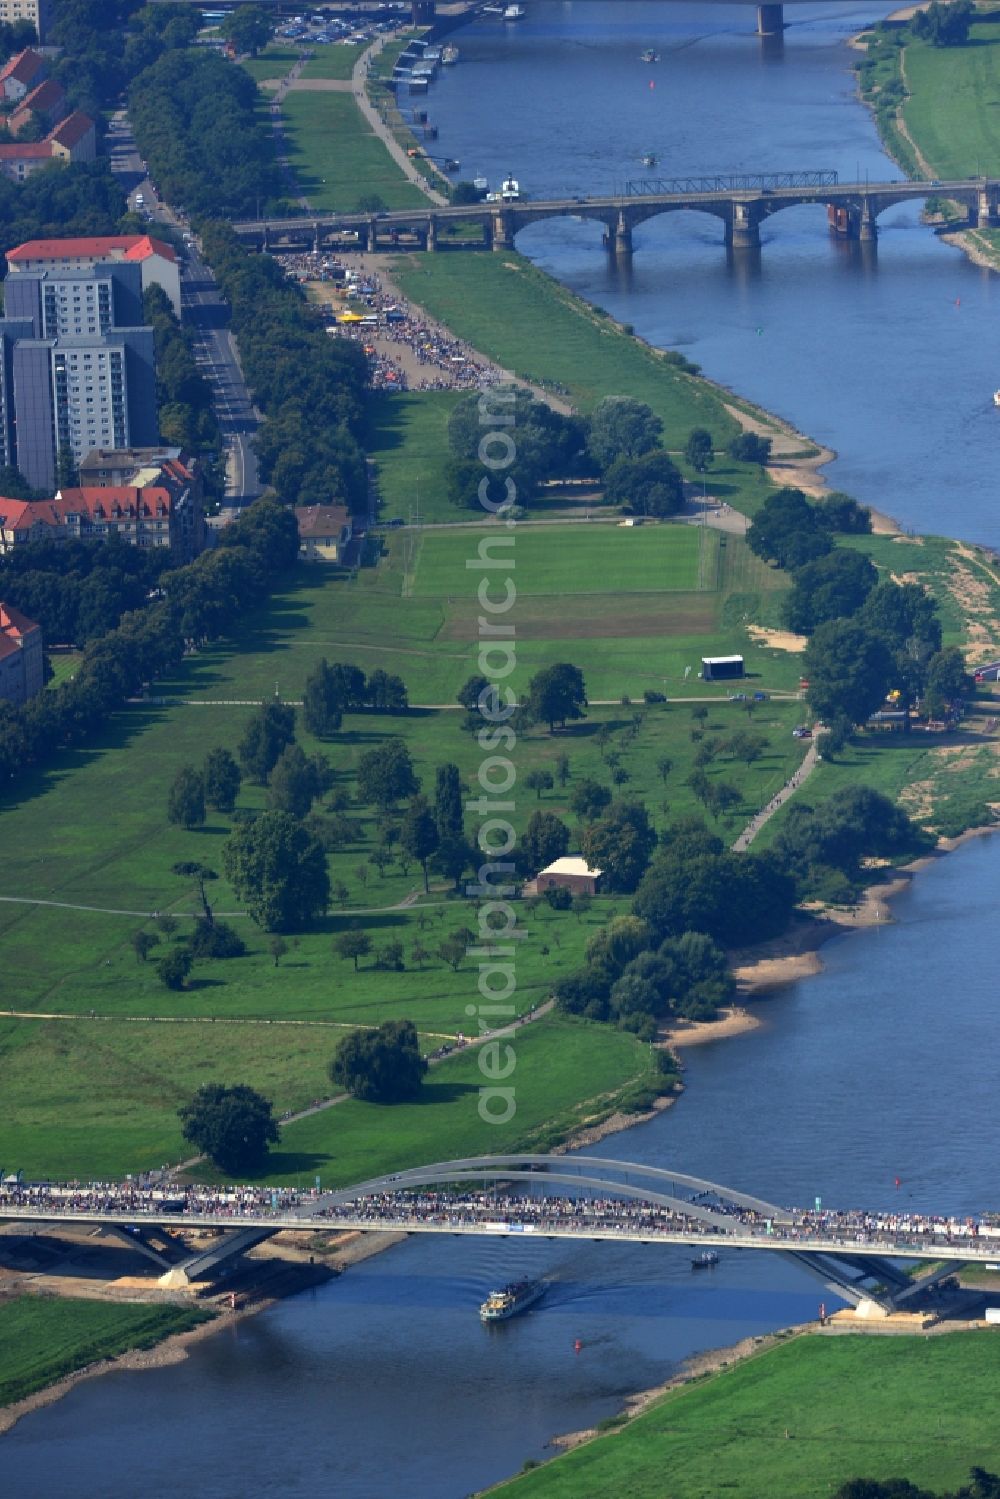 Aerial photograph Dresden - Visitors and pedestrians at the opening after completion of Waldschloesschenbrücke on the river Elbe in Dresden in Saxony